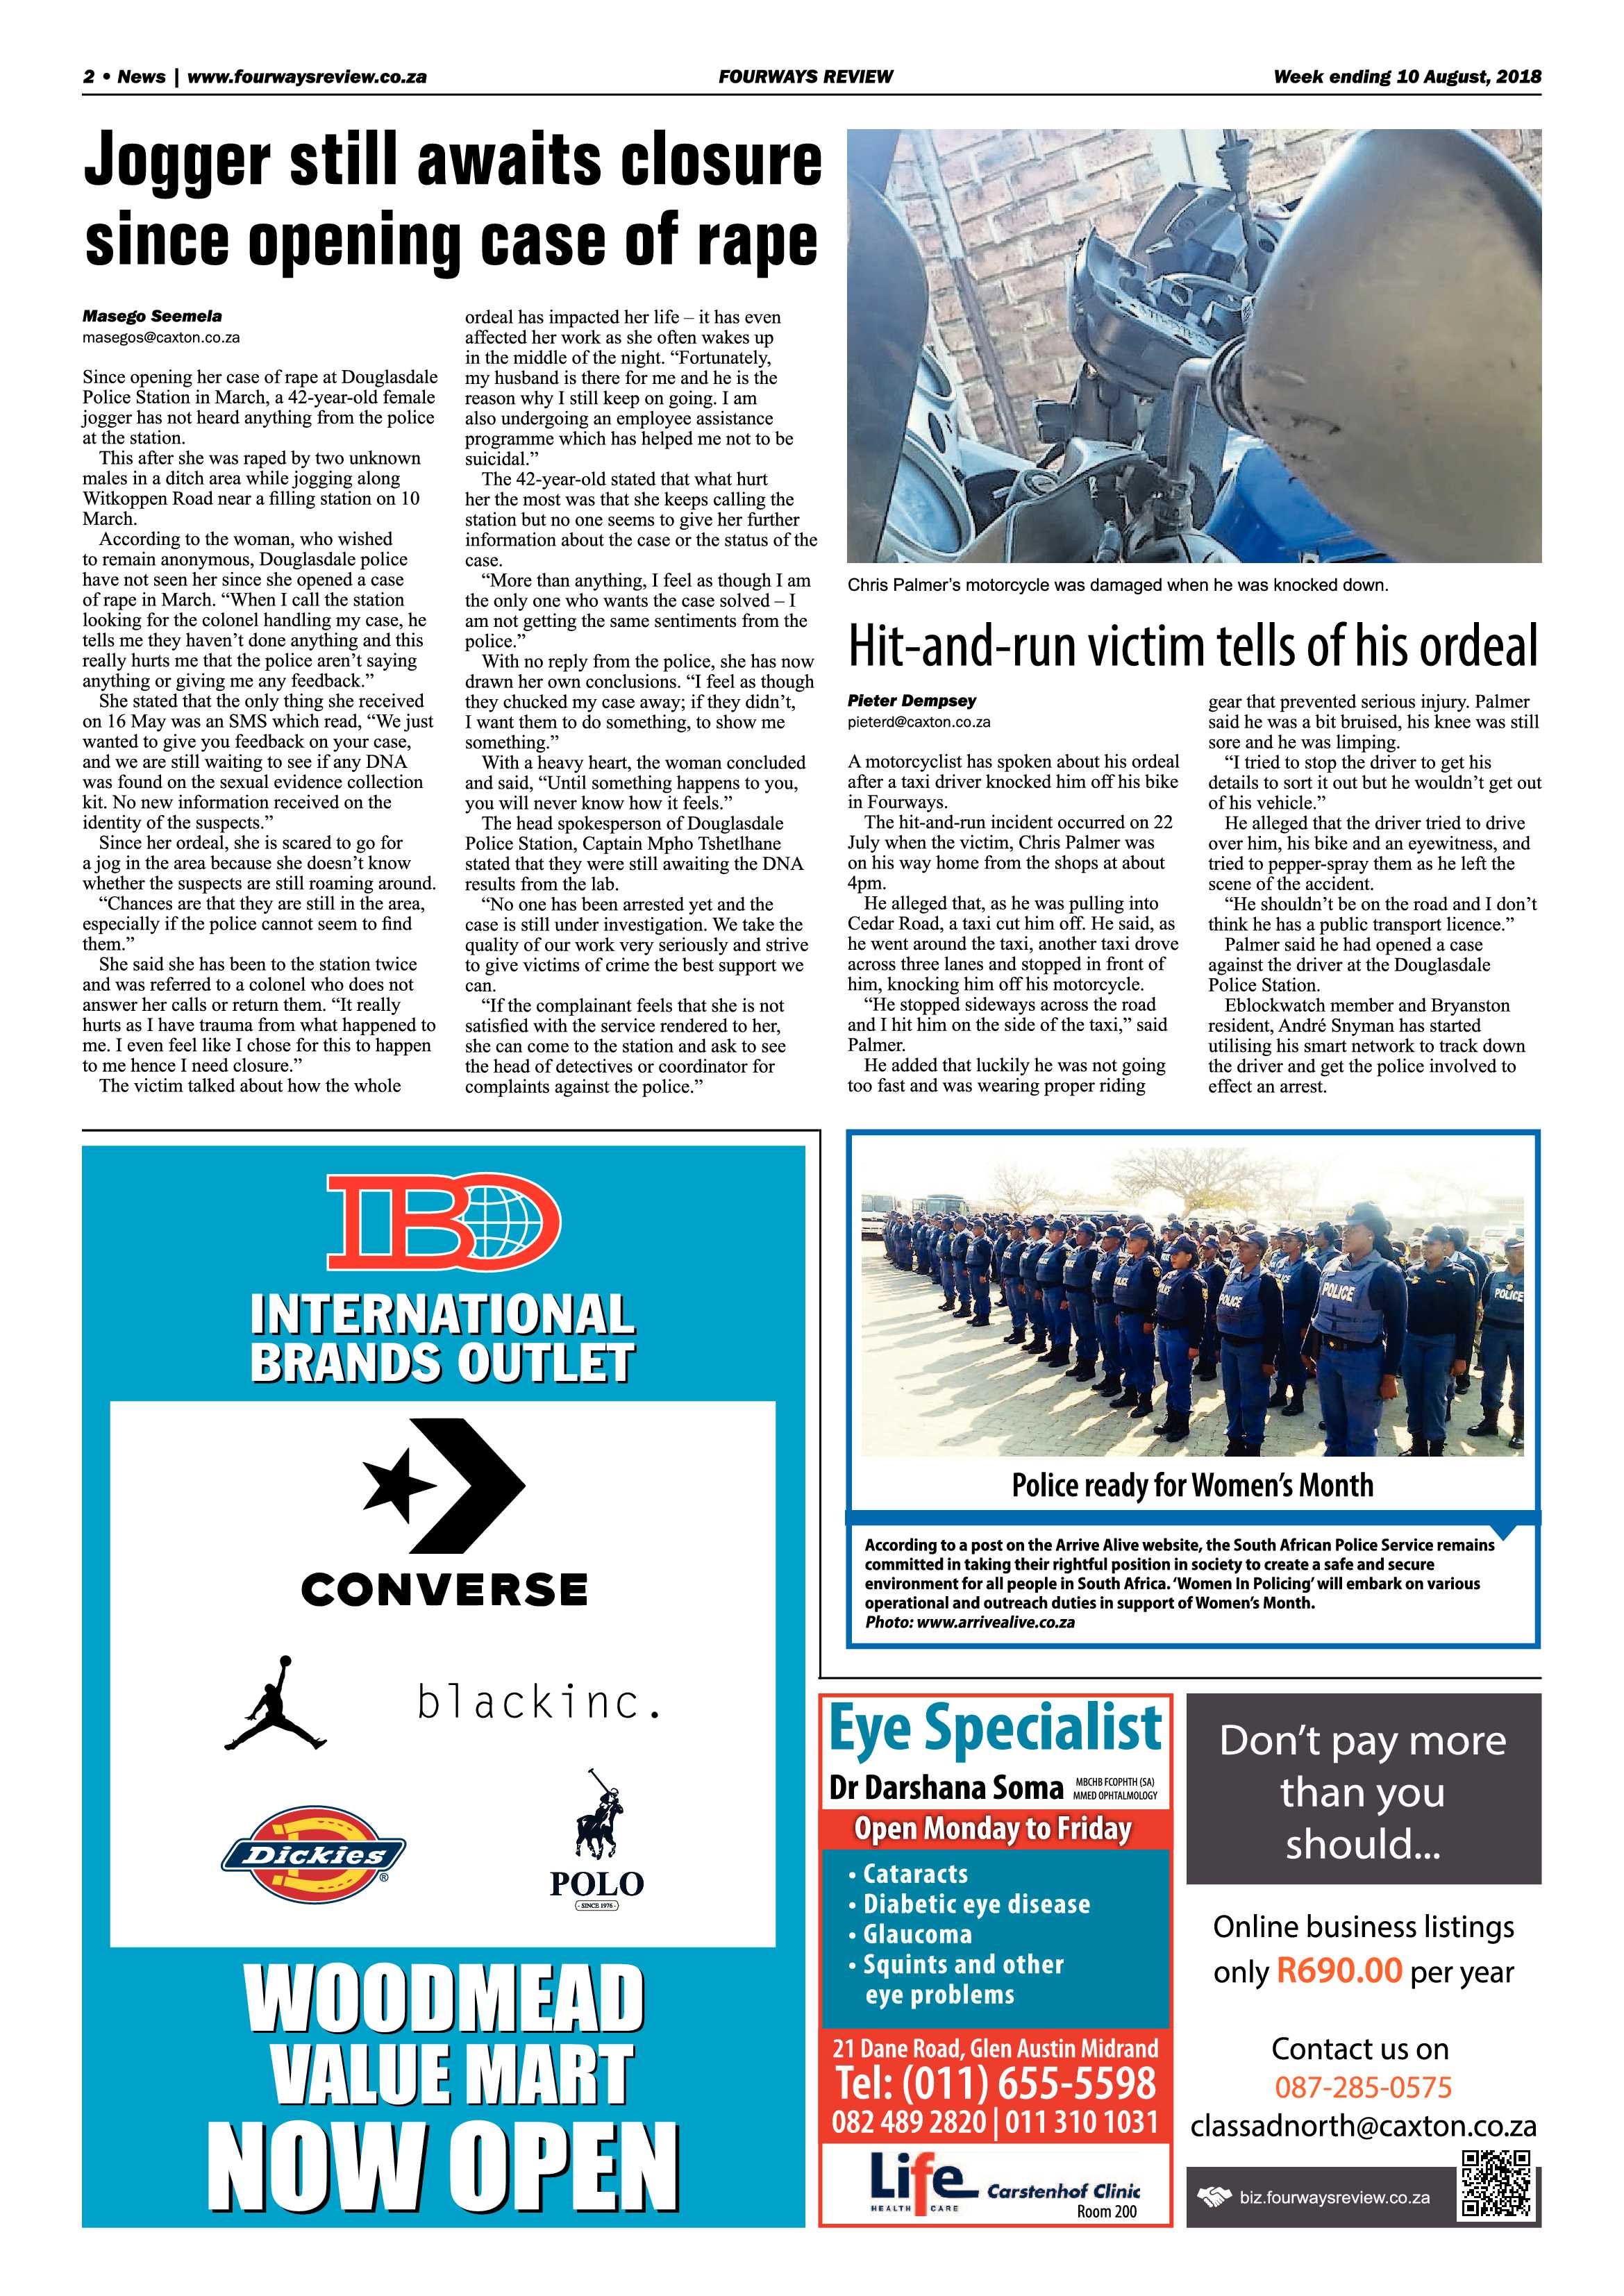 Fourways Review 10 August, 2018 page 2